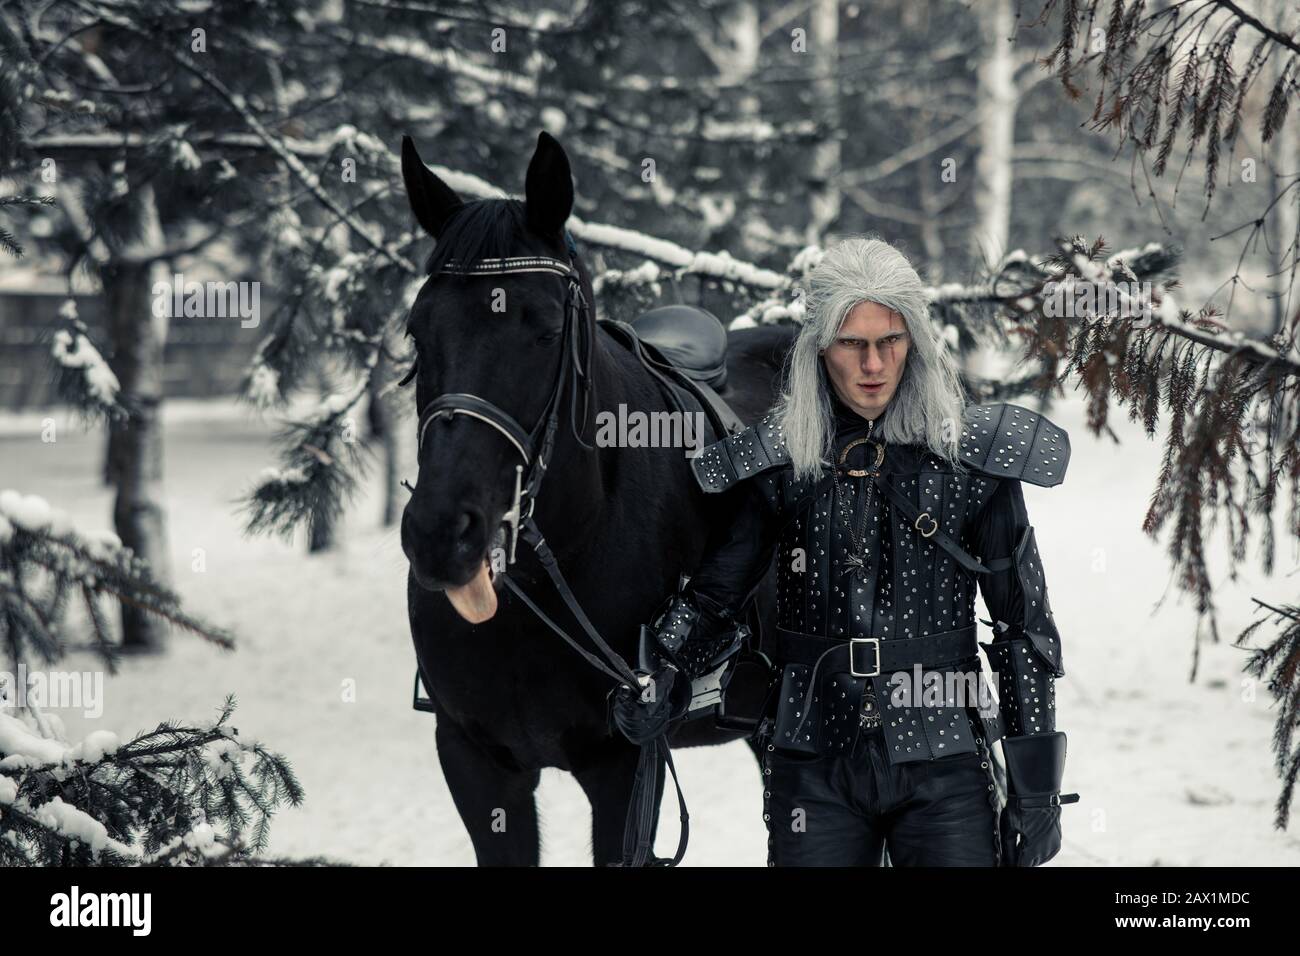 Man in image of ancient warrior witcher next to a horse in snow winter forest. Stock Photo